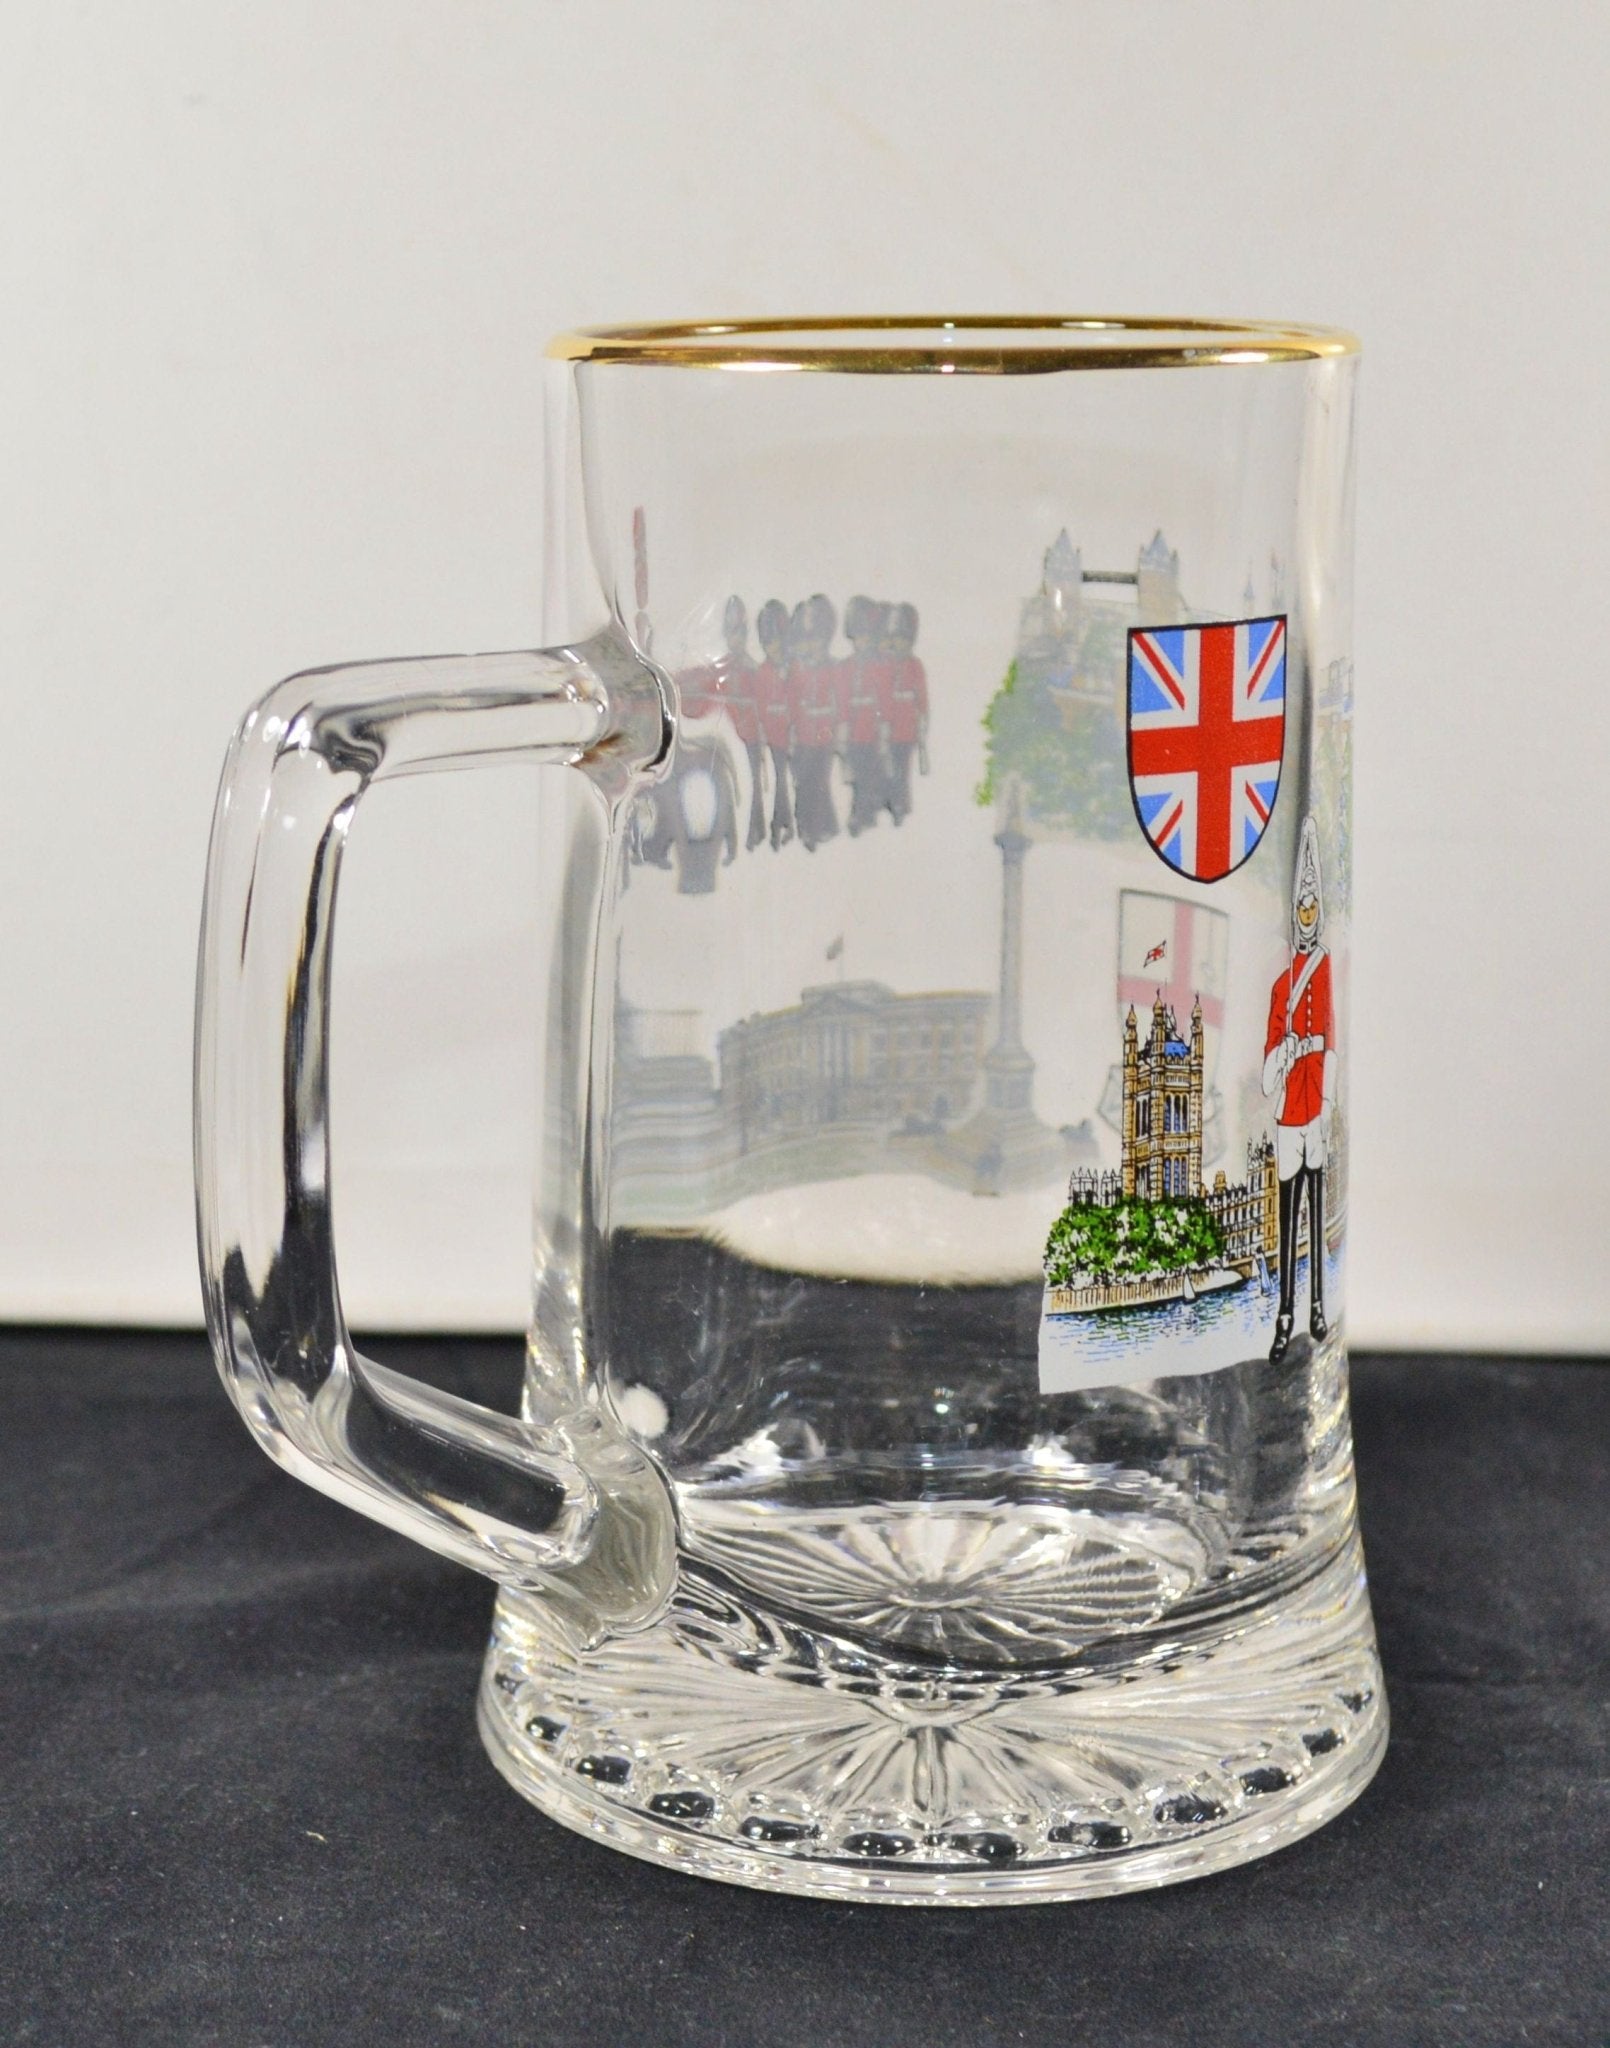 SOUVENIR GLASS TANKARD LONDON(PREVIOUSLY OWNED) VERY GOOD CONDITION - TMD167207